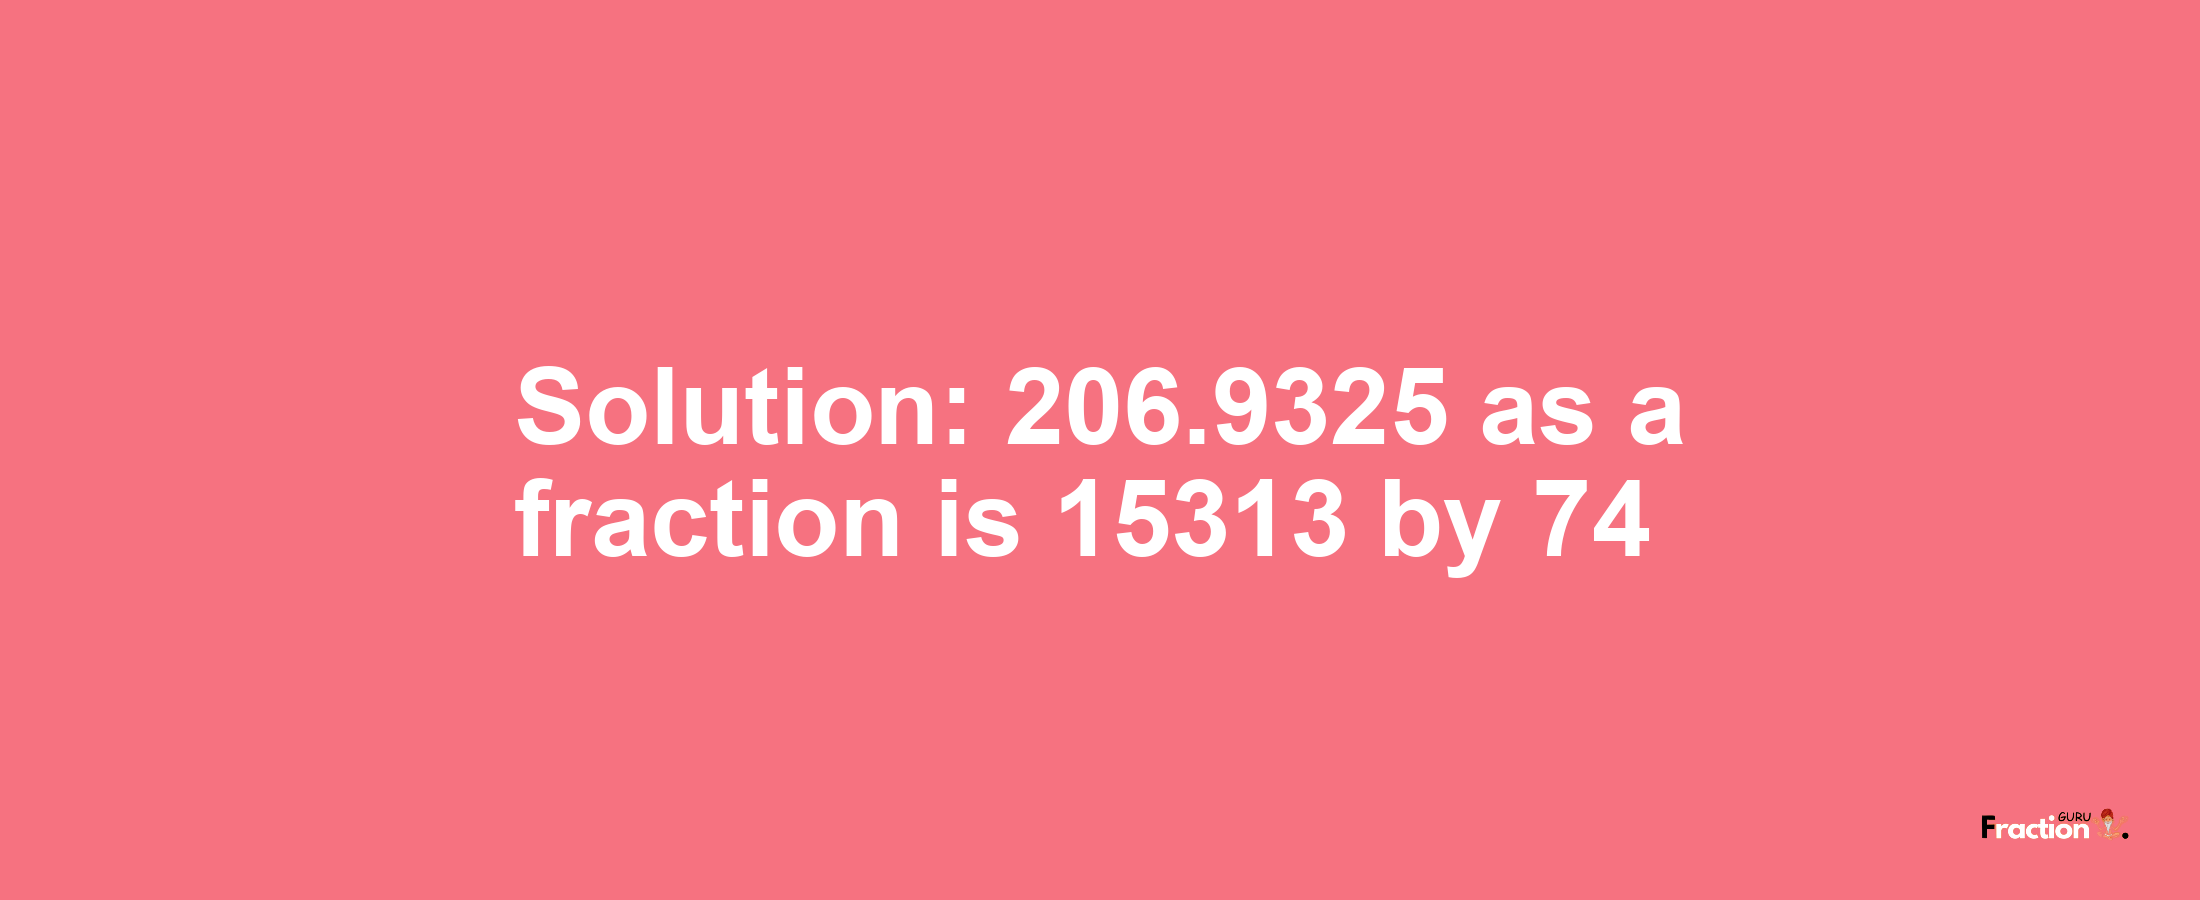 Solution:206.9325 as a fraction is 15313/74